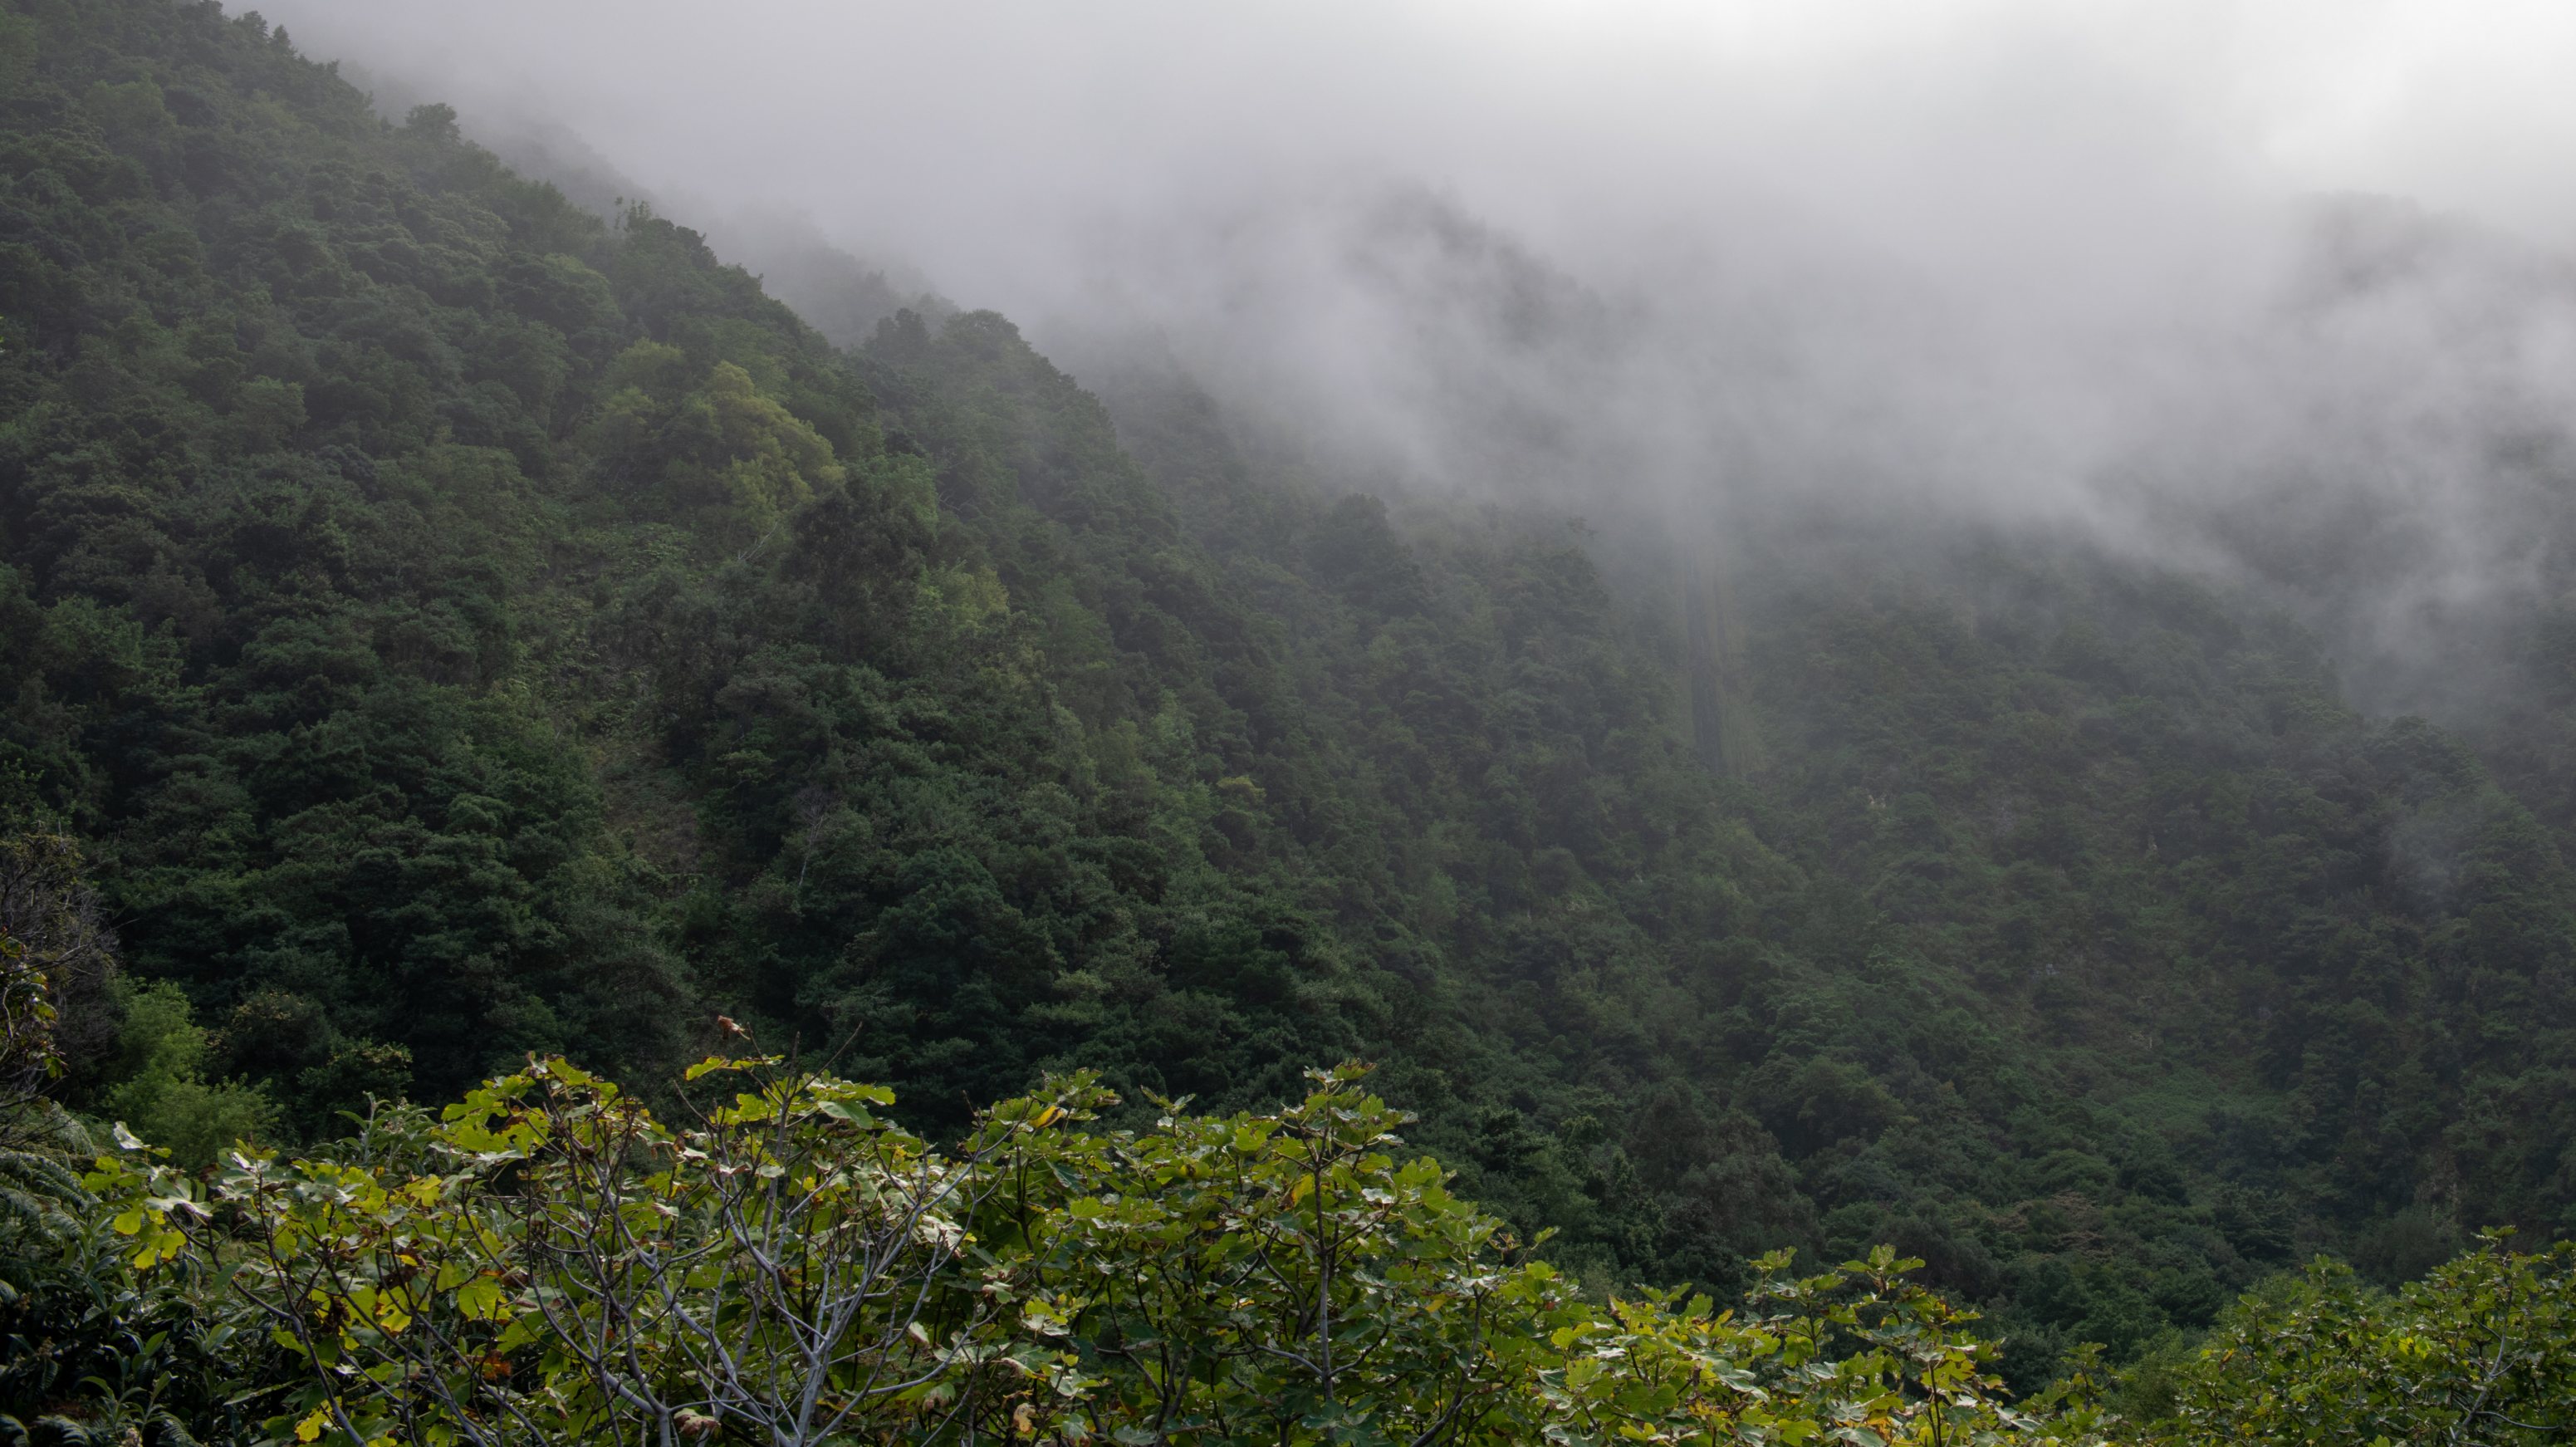 Clouds covering a laurel forest (laurisilva) on a hill